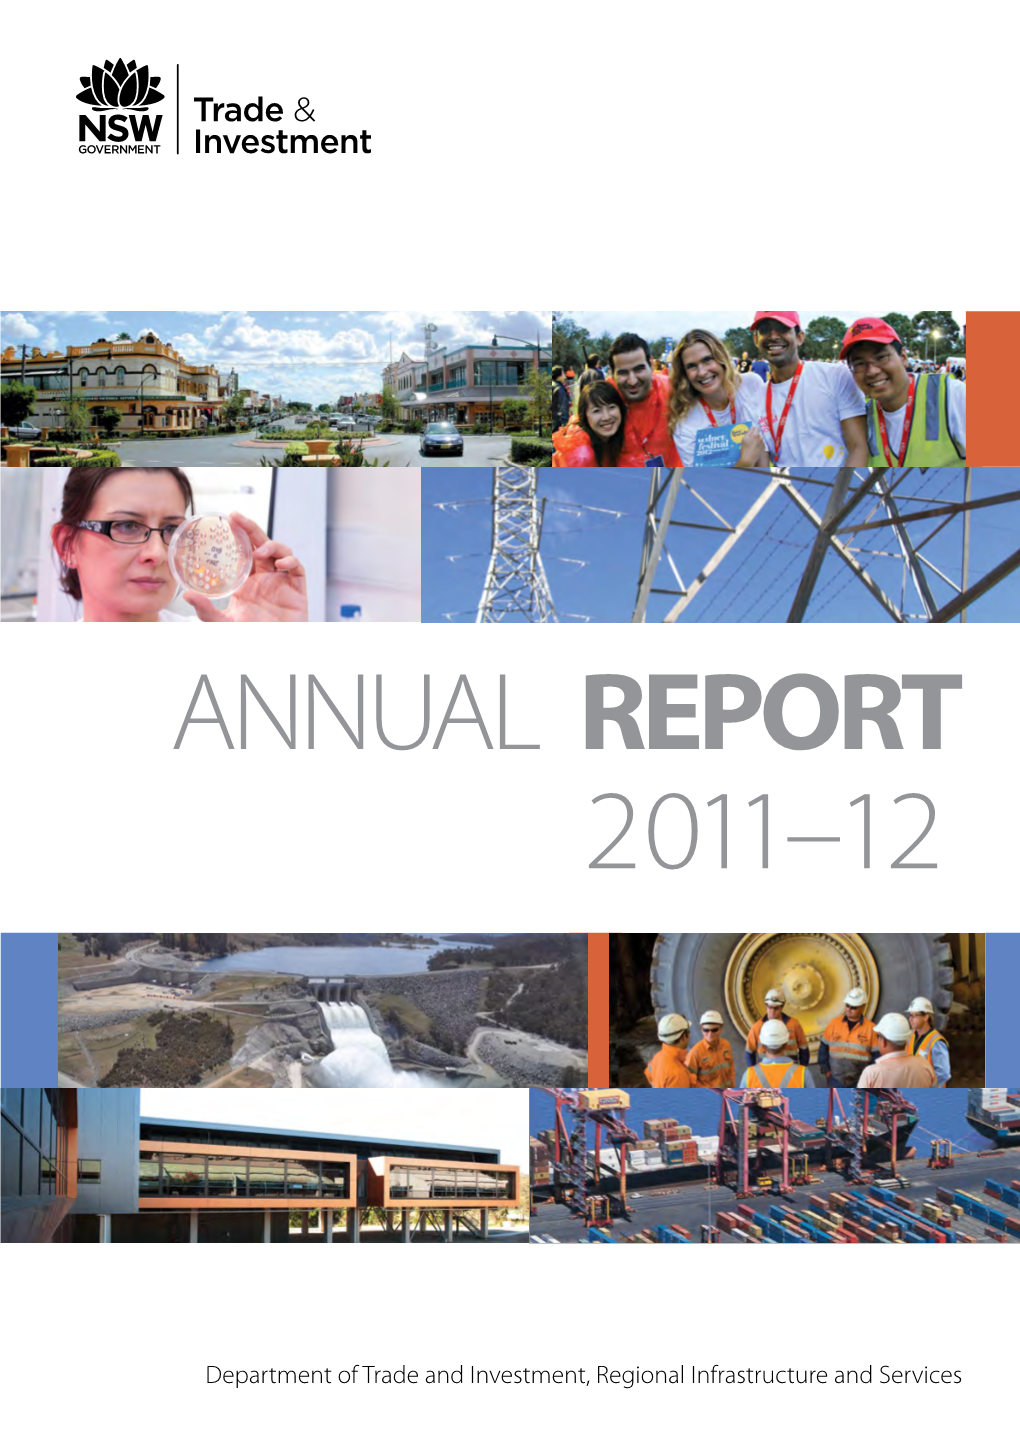 Trade & Investment NSW Annual Report 2011-12